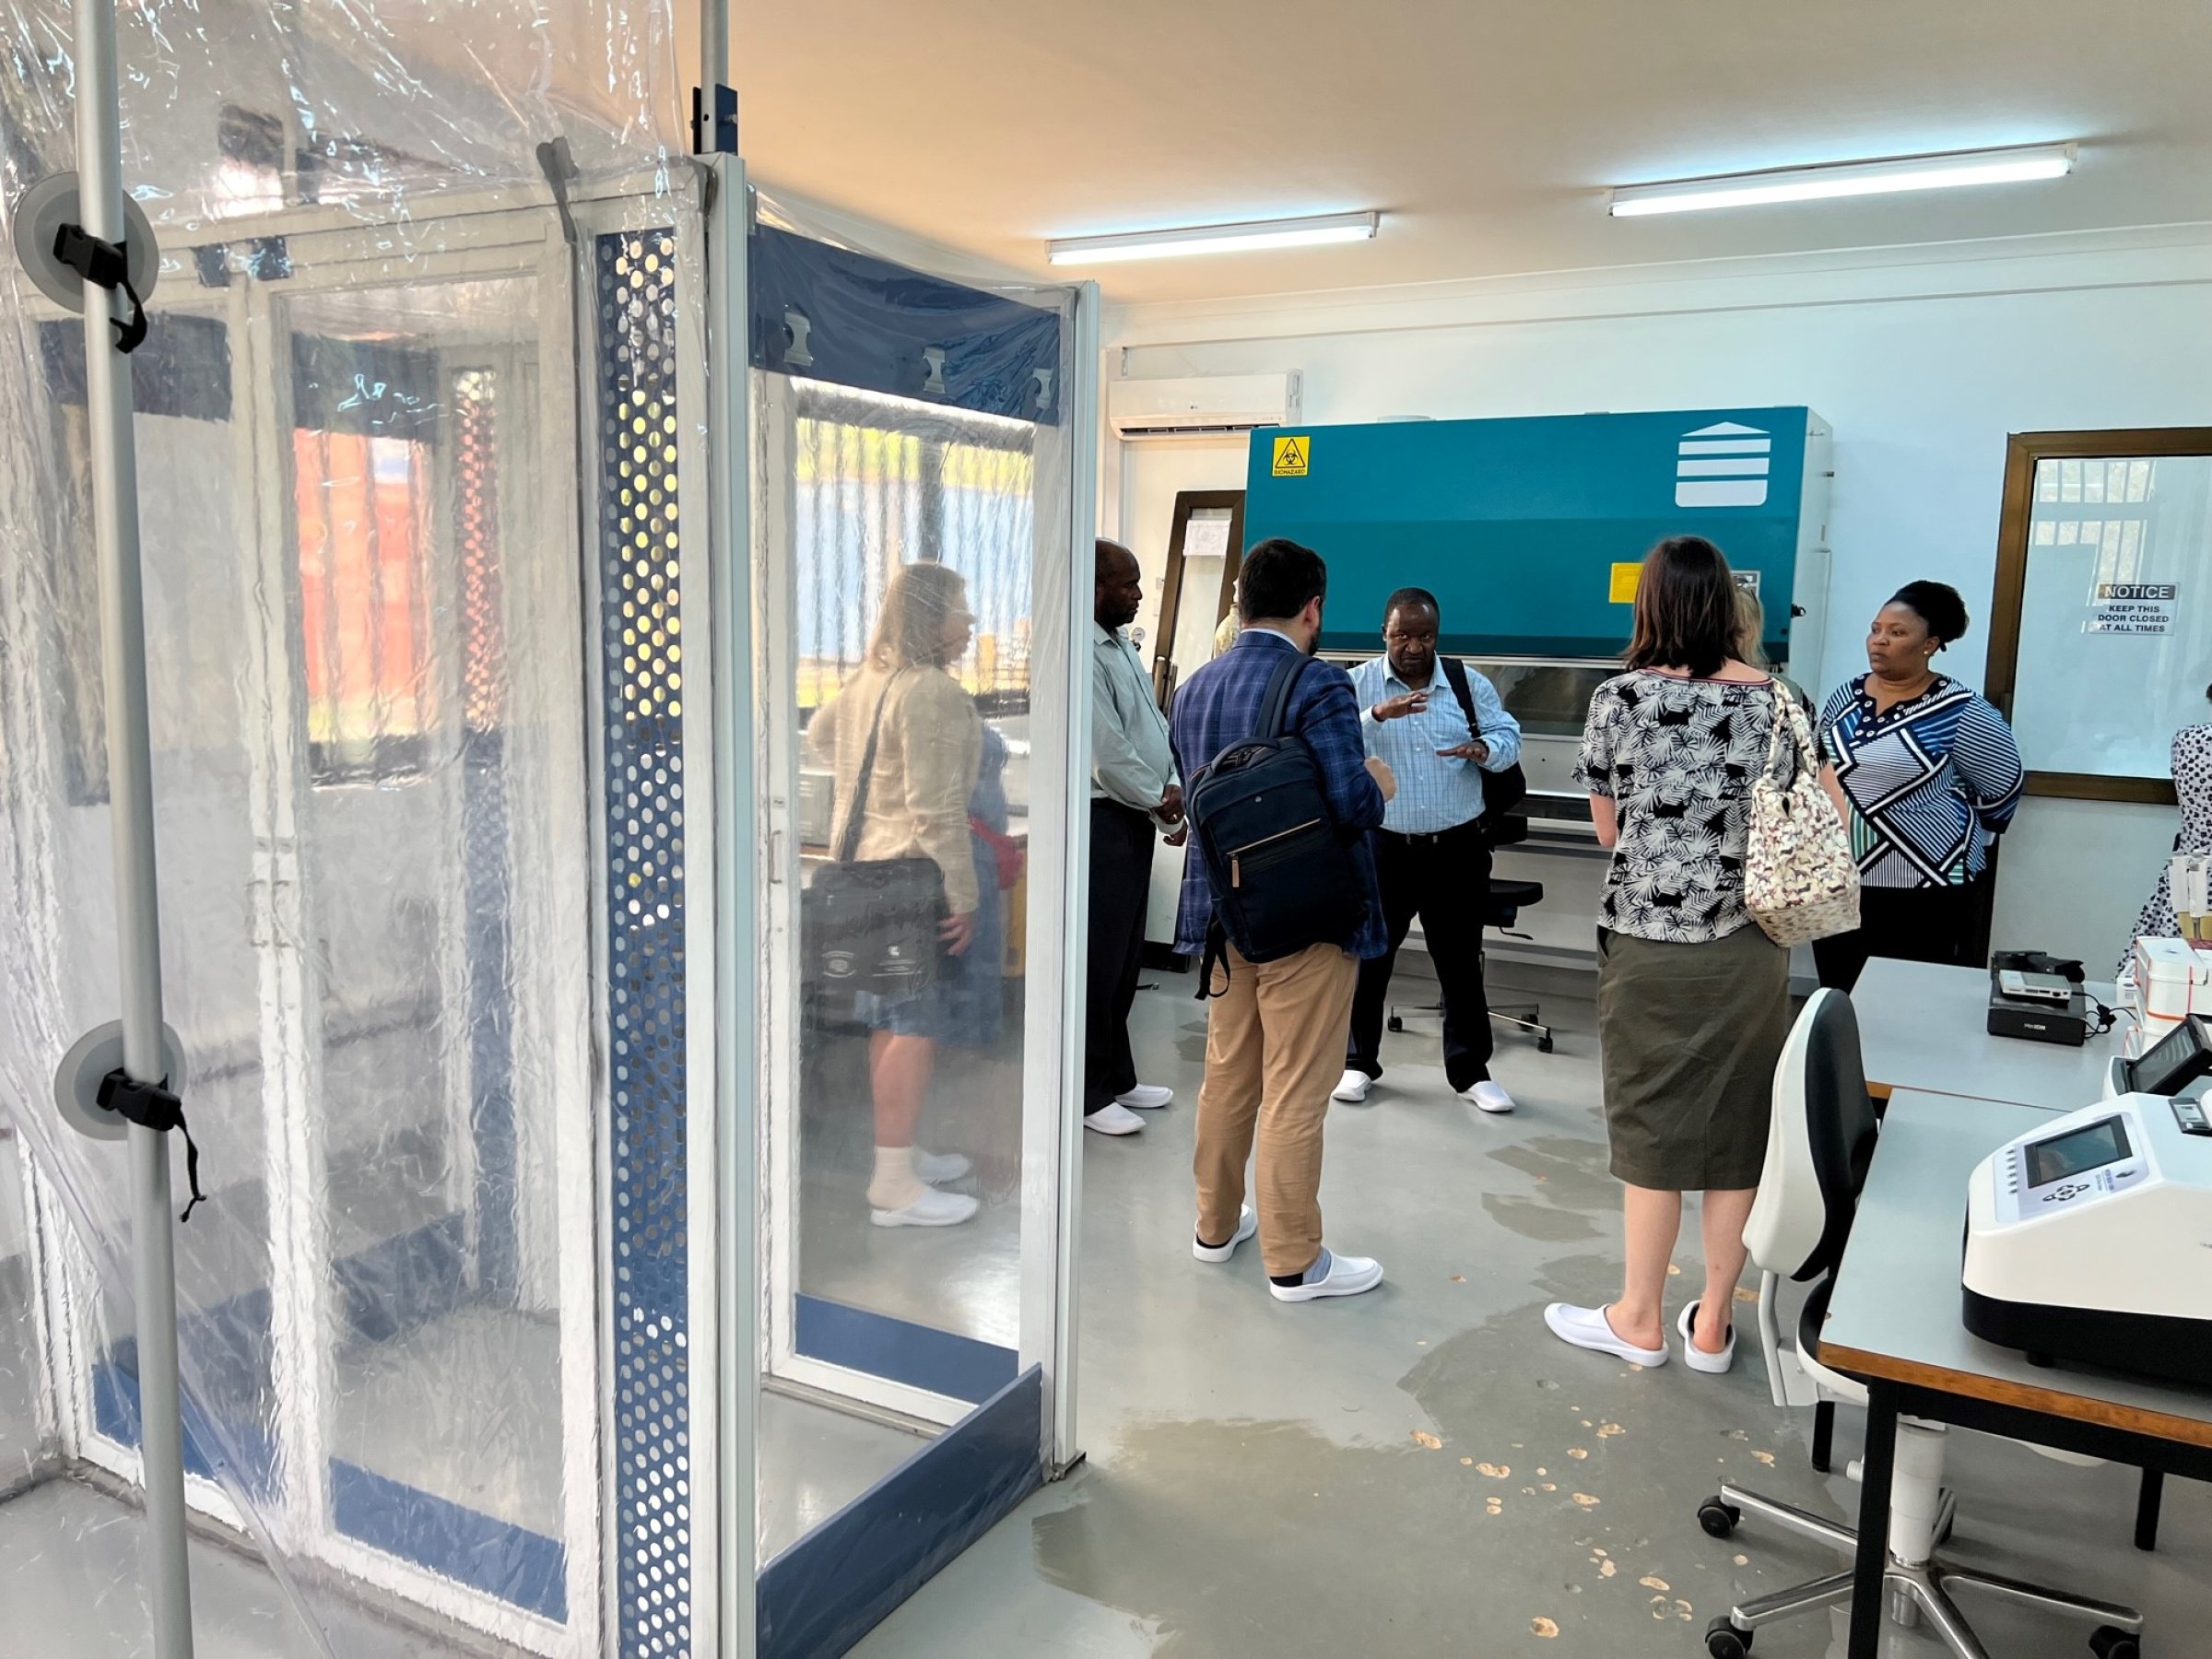 Here, the representatives from the NVI are visiting one of the laboratories at the Sokoine University. Photo: Bryndis Holm